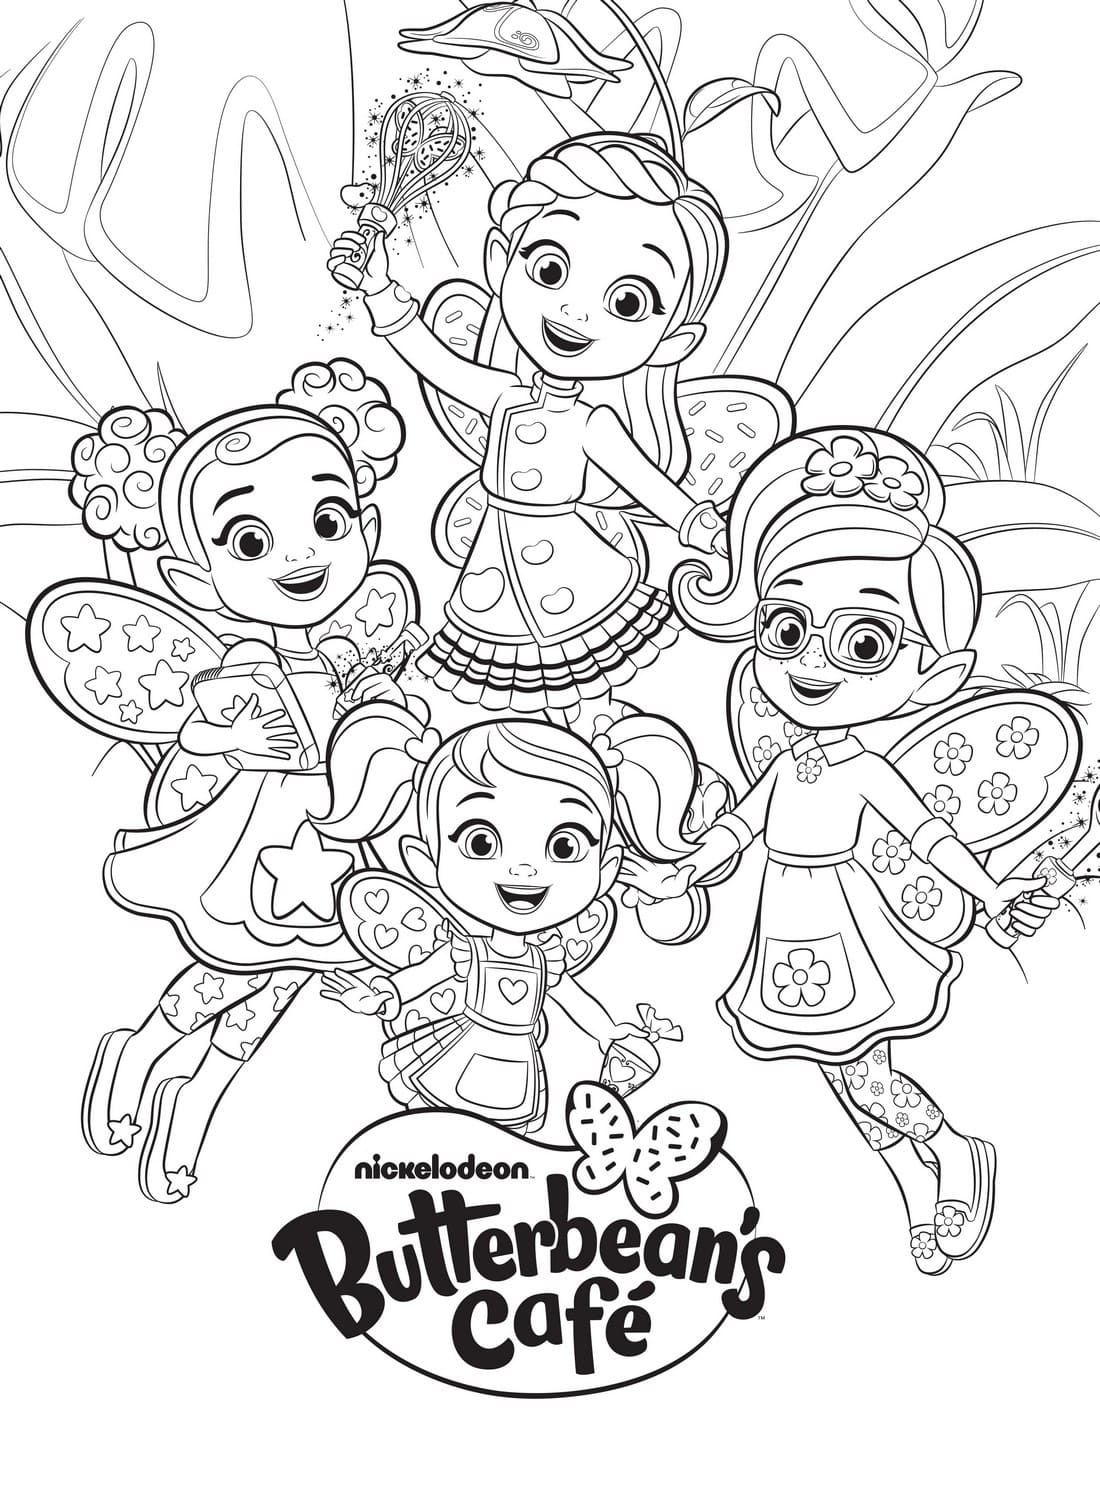 Butterbean's Cafe Coloring Page coloring page